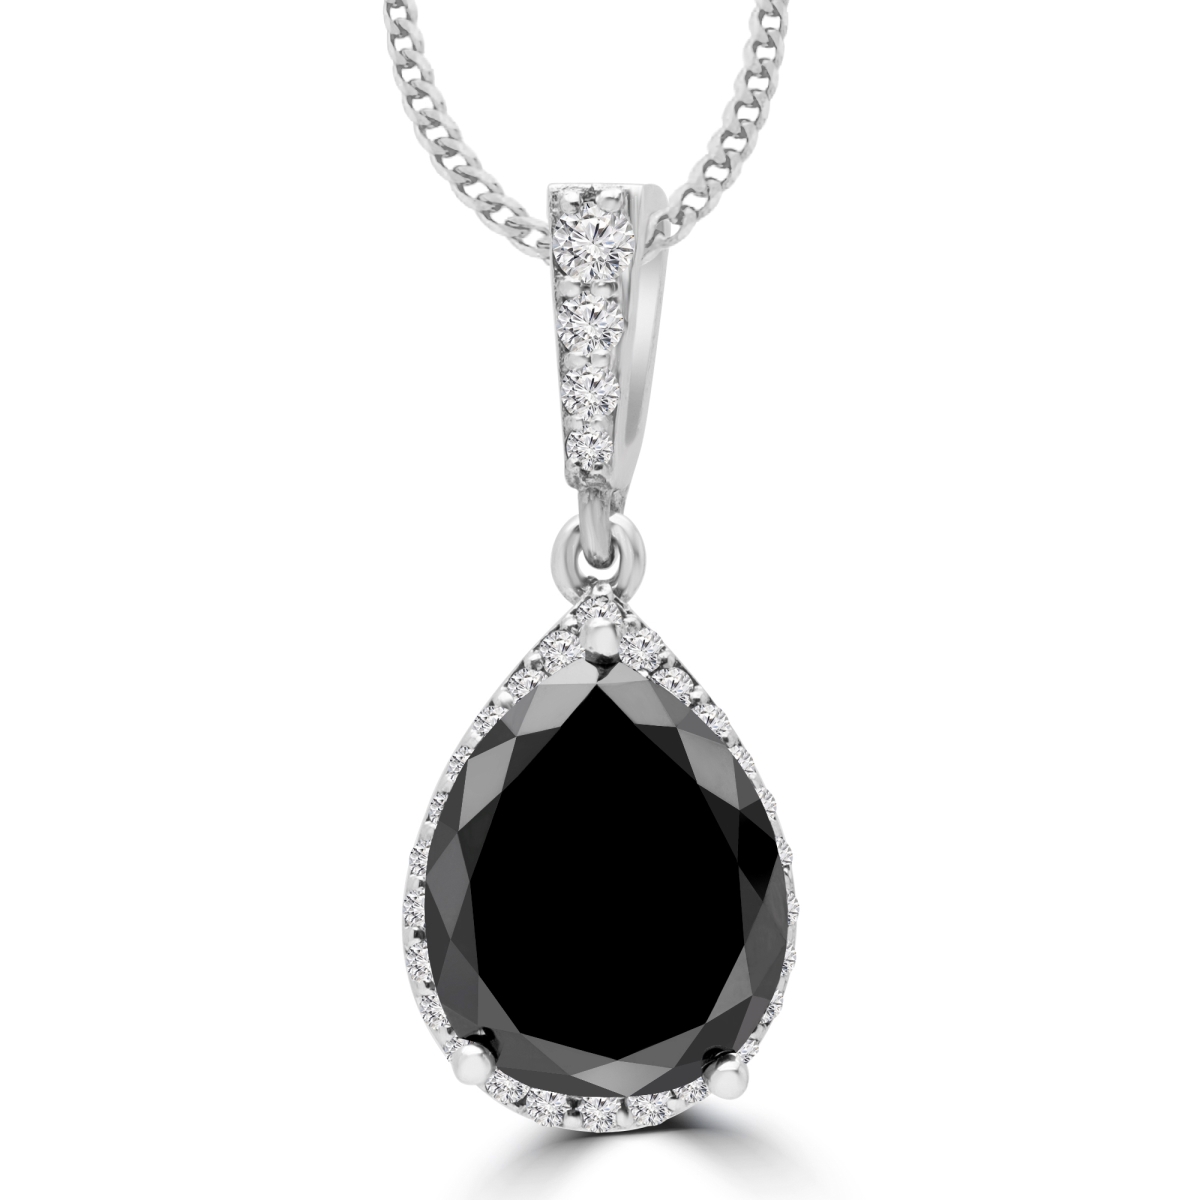 Md170448 4.02 Ctw Pear Black Diamond Halo Pendant Necklace In 14k White Gold With Chain